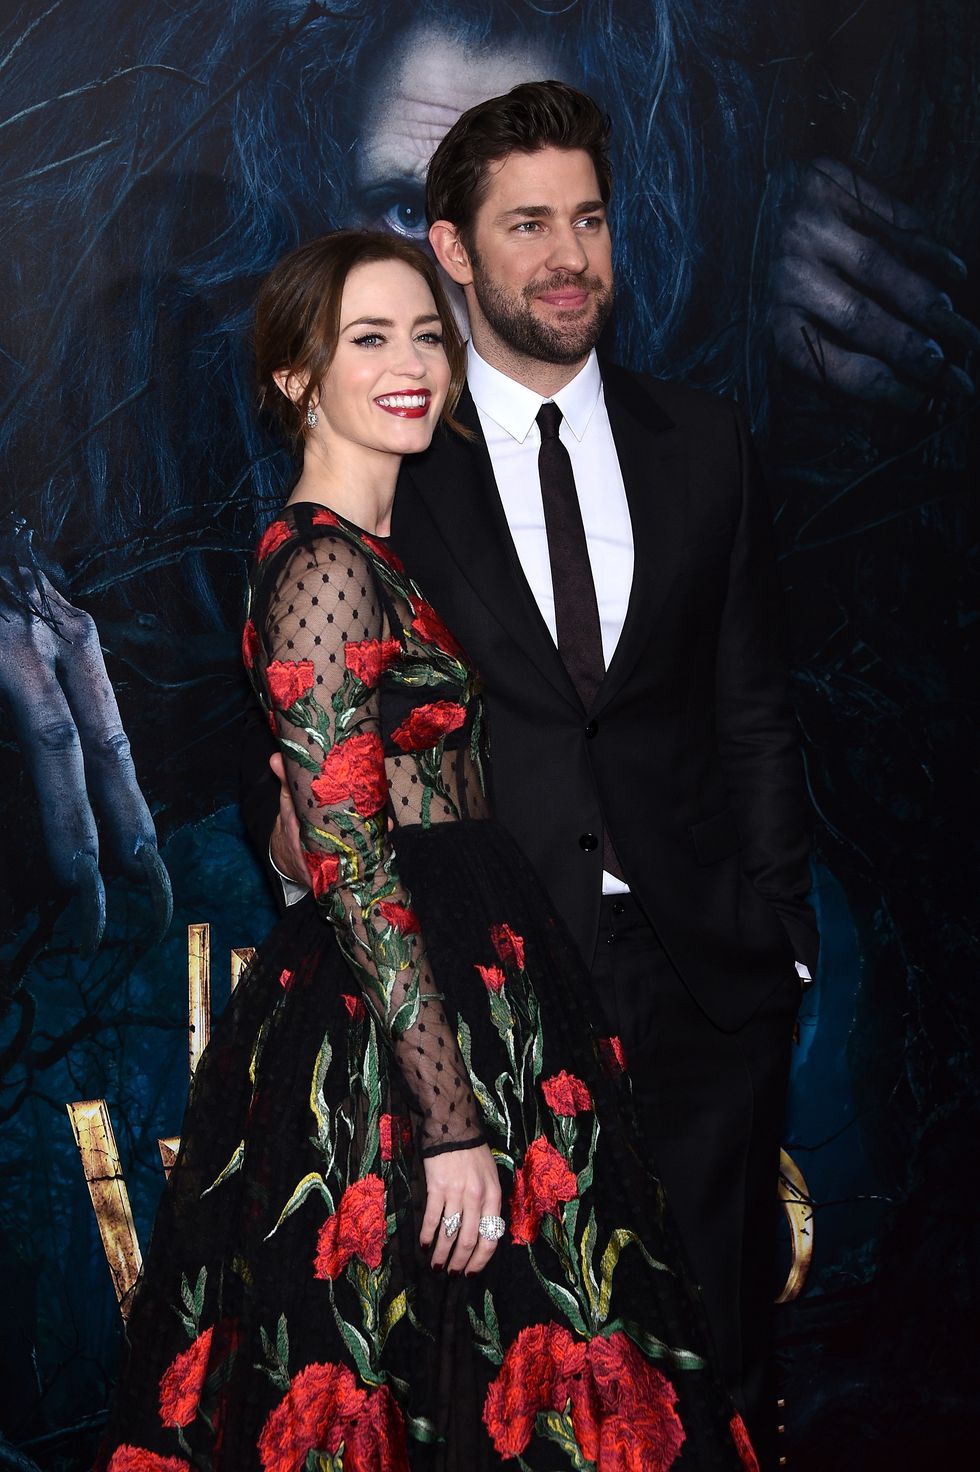 emily blunt and husband john krasinski on the red carpet at into the woods premiere